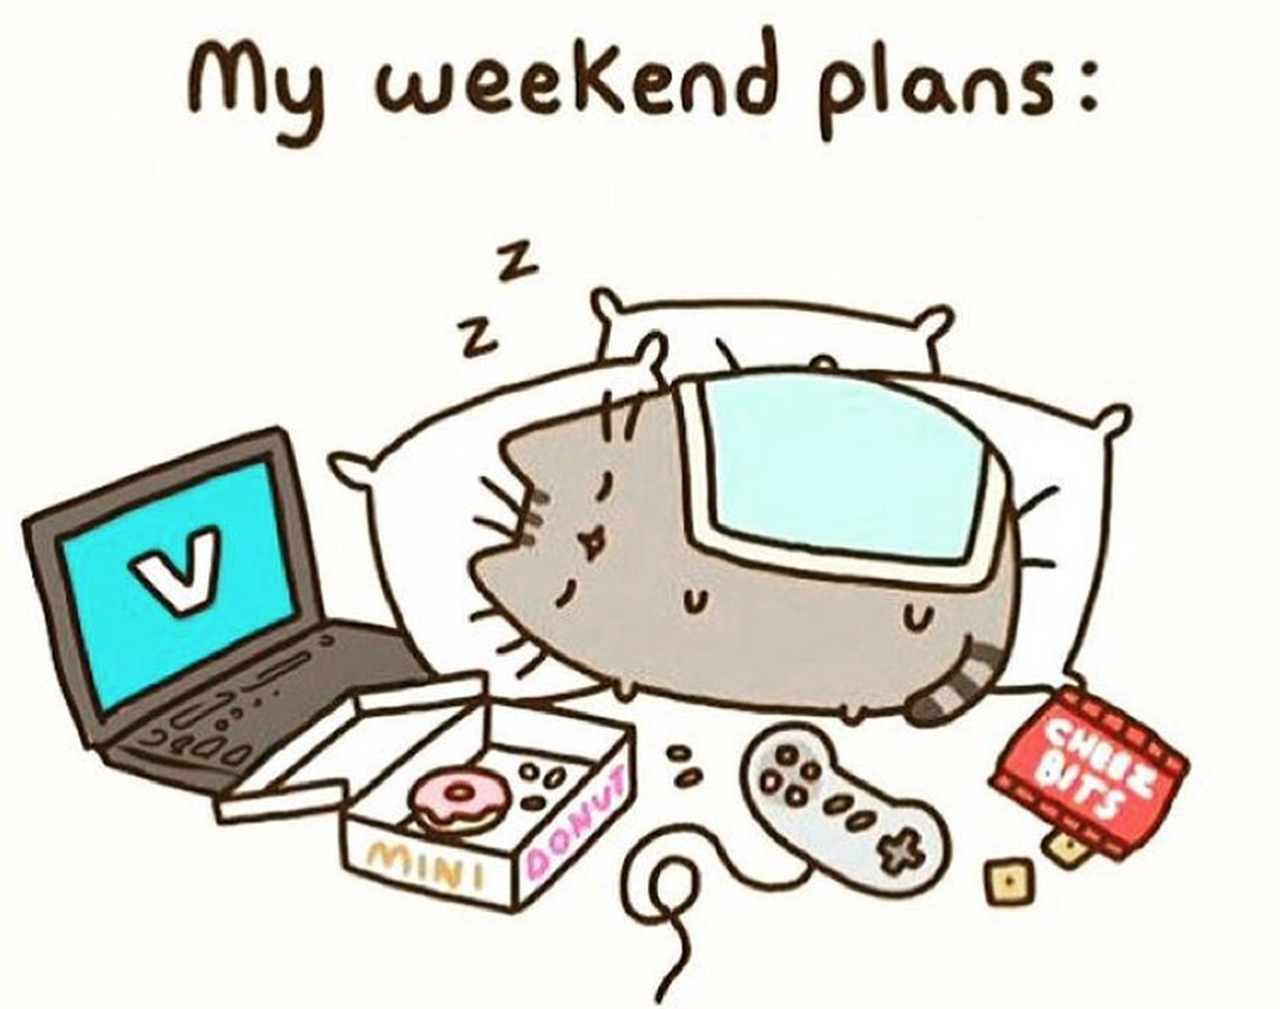 Weekend weekend we can. My Plans for the weekend. Plans for the weekend. My weekend презентация. Weekends картинки.